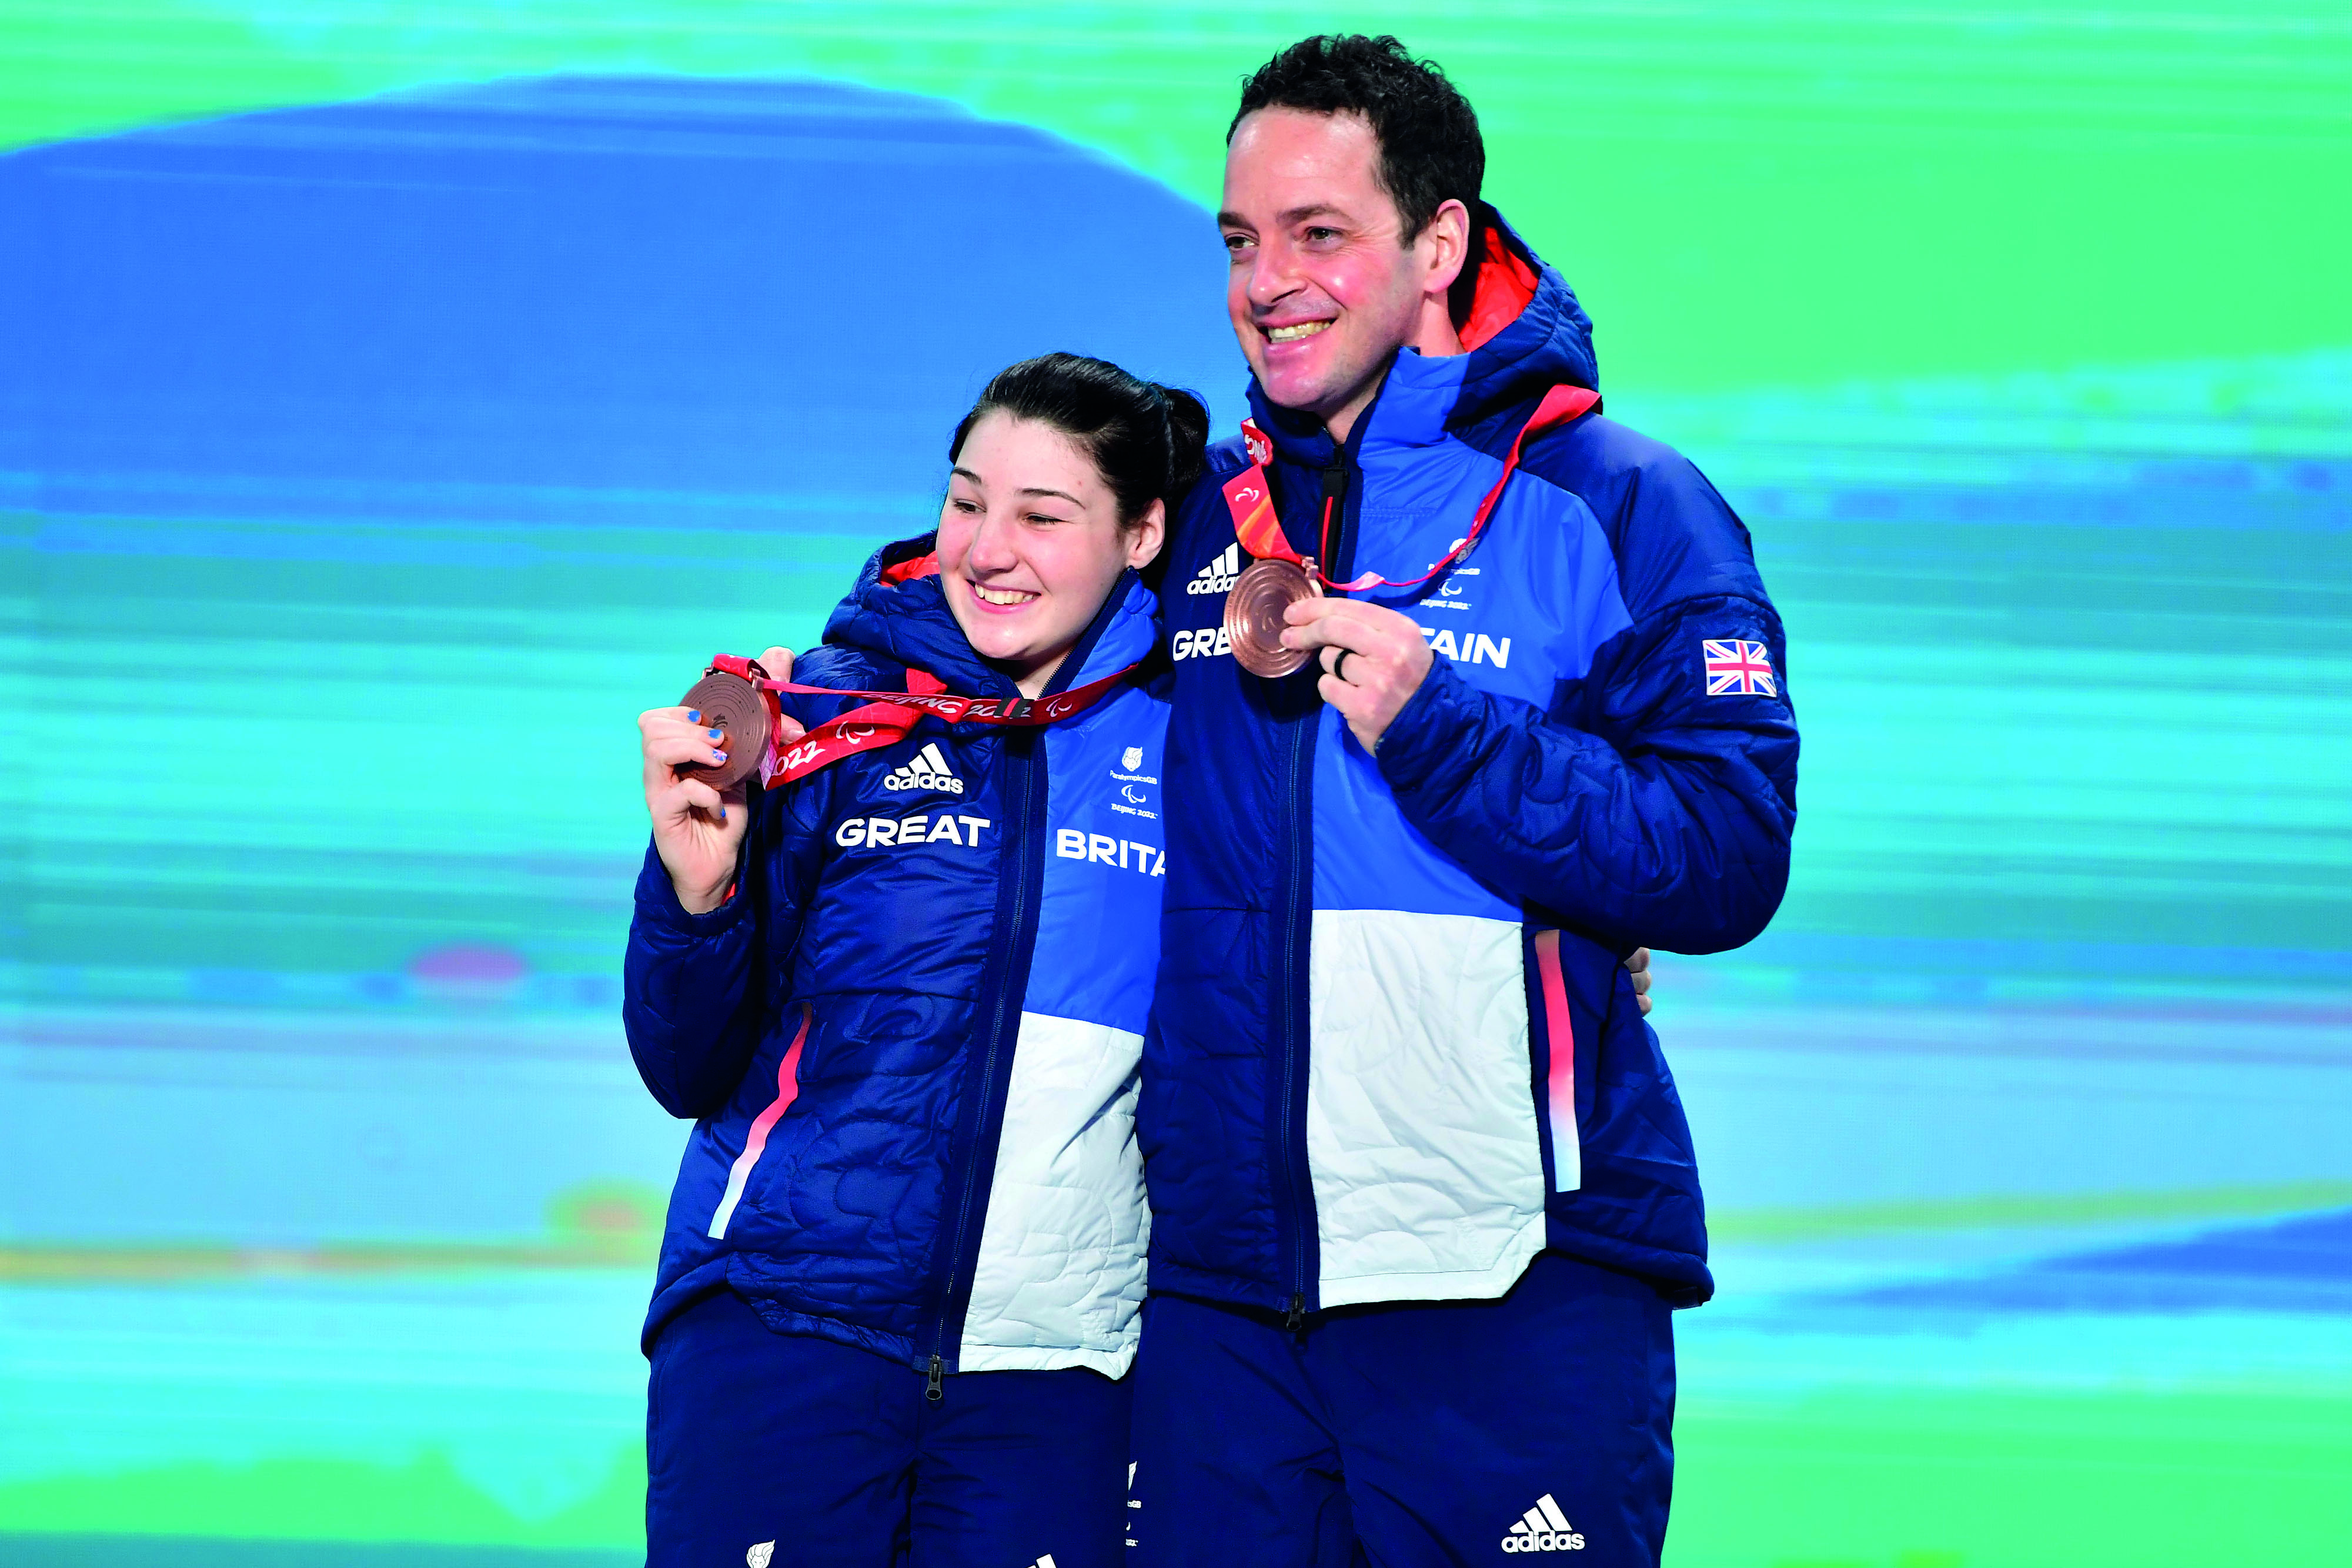 Gary and Menna hold their bronze medals.